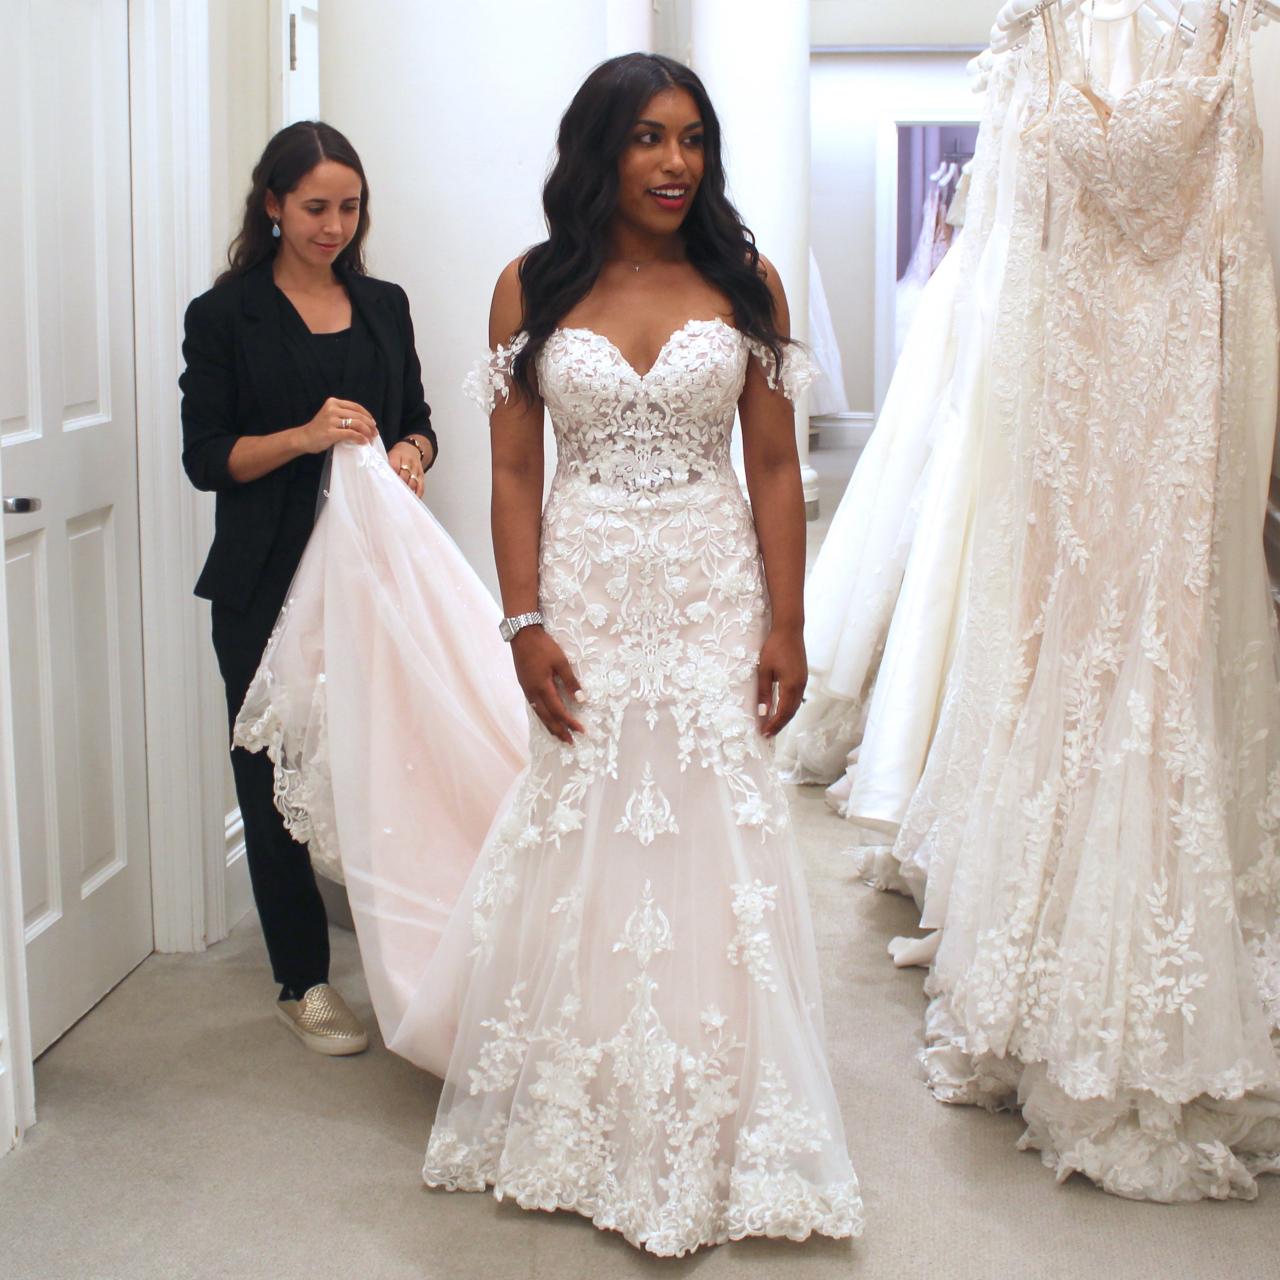 Wedding Dresses with Capes -Transform Your Look - Kleinfeld